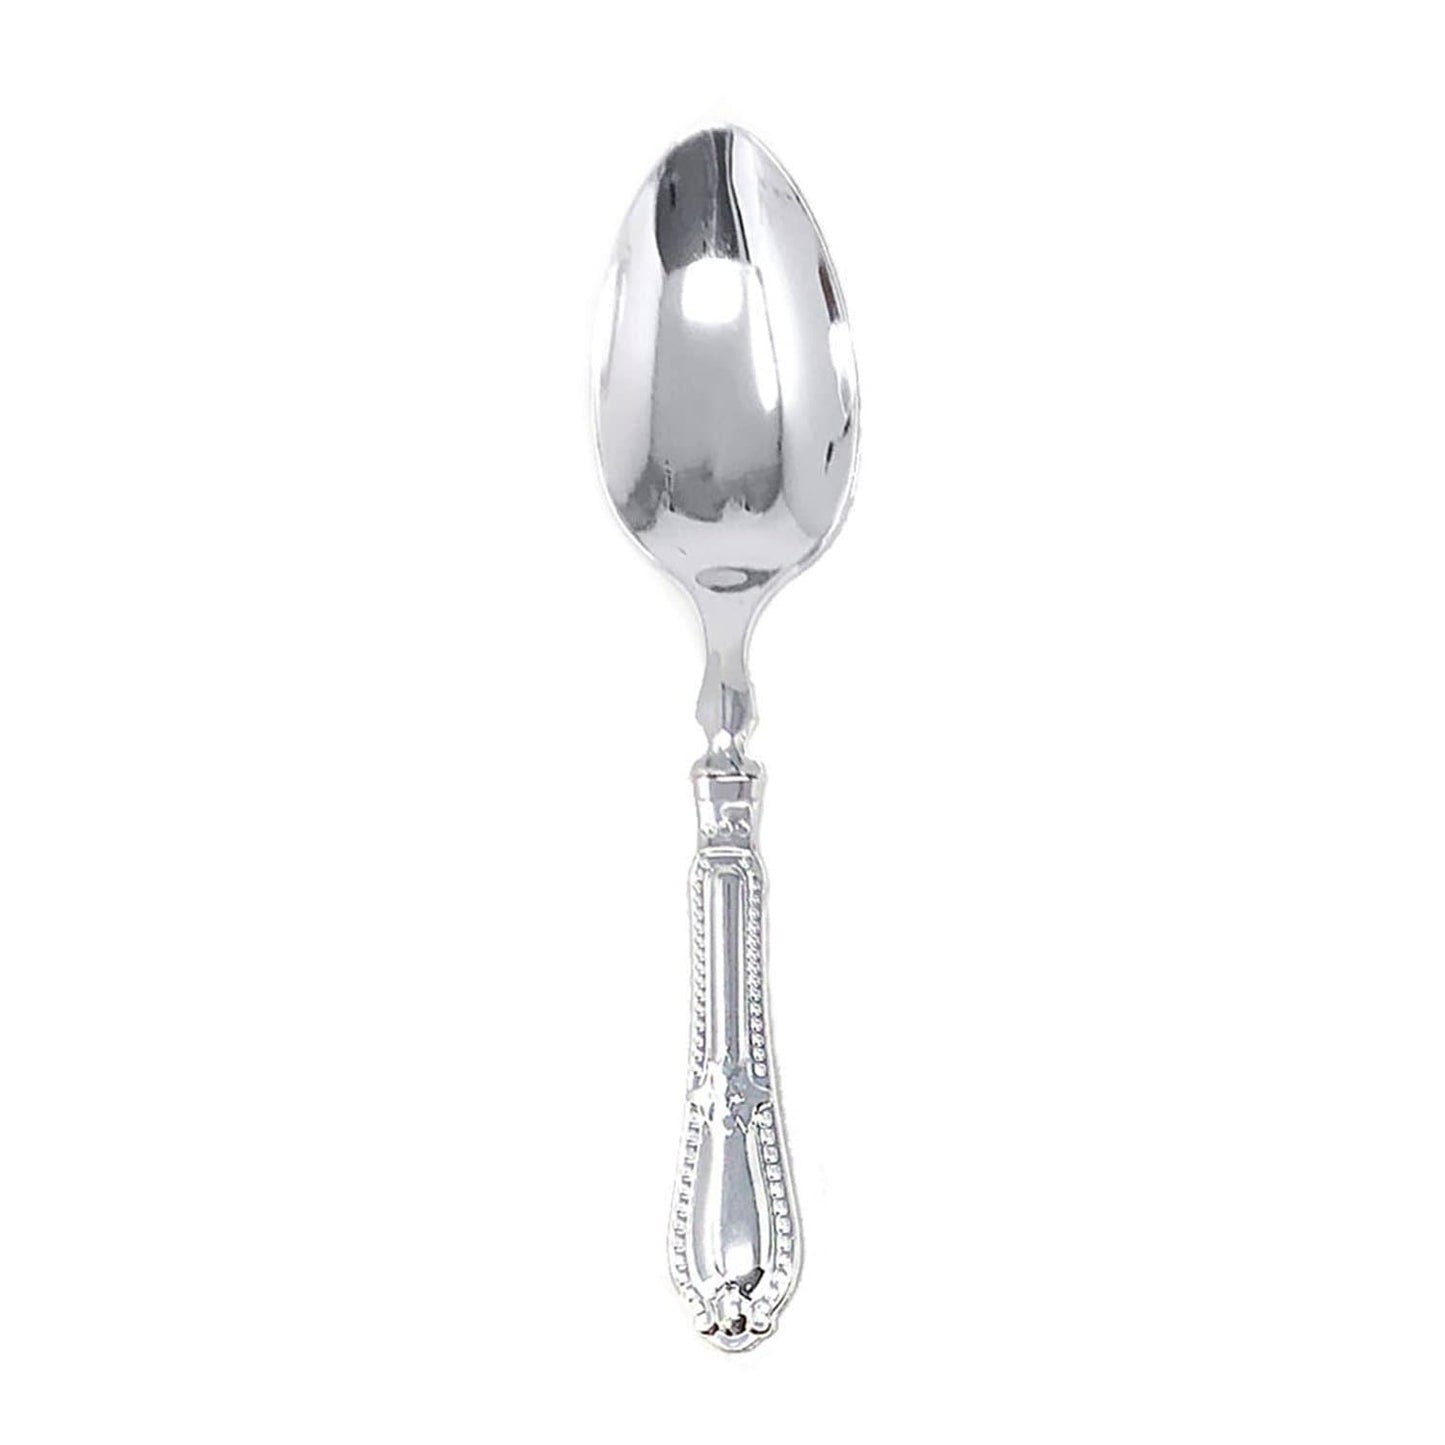 SALE Luxury Baroque Collection Silver Tee Spoons 10 count Tablesettings Decorline   